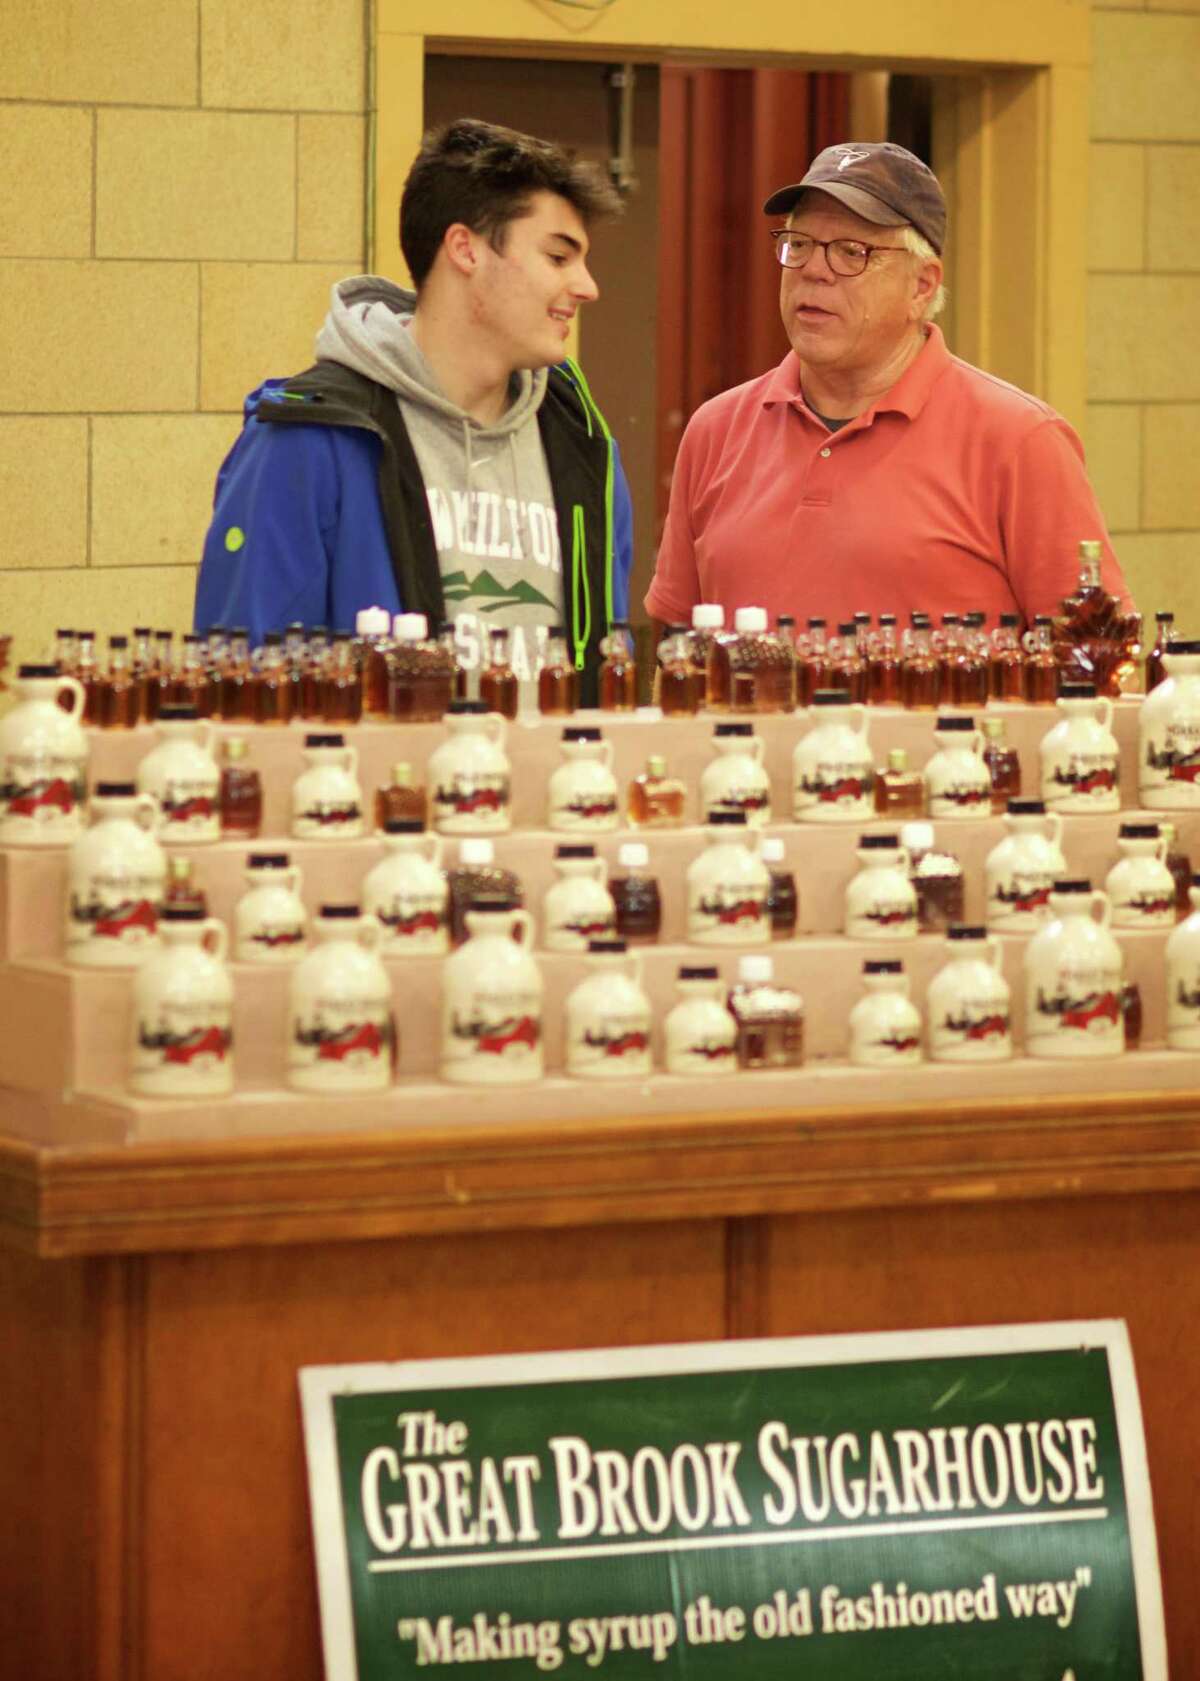 Owen Swanson from the NM Youth Agency and Mark Mankin from Sullivan Farm selling The Great Brook Sugarhouse Syrup. The New Milford Winter Market will be held Saturday, January 14th and 28th, and Saturday, February 11th and 25th from 9:00am to 1:00pm at the Catherine E. Lillis Administration Building at 50 East Street in New Milford, CT.